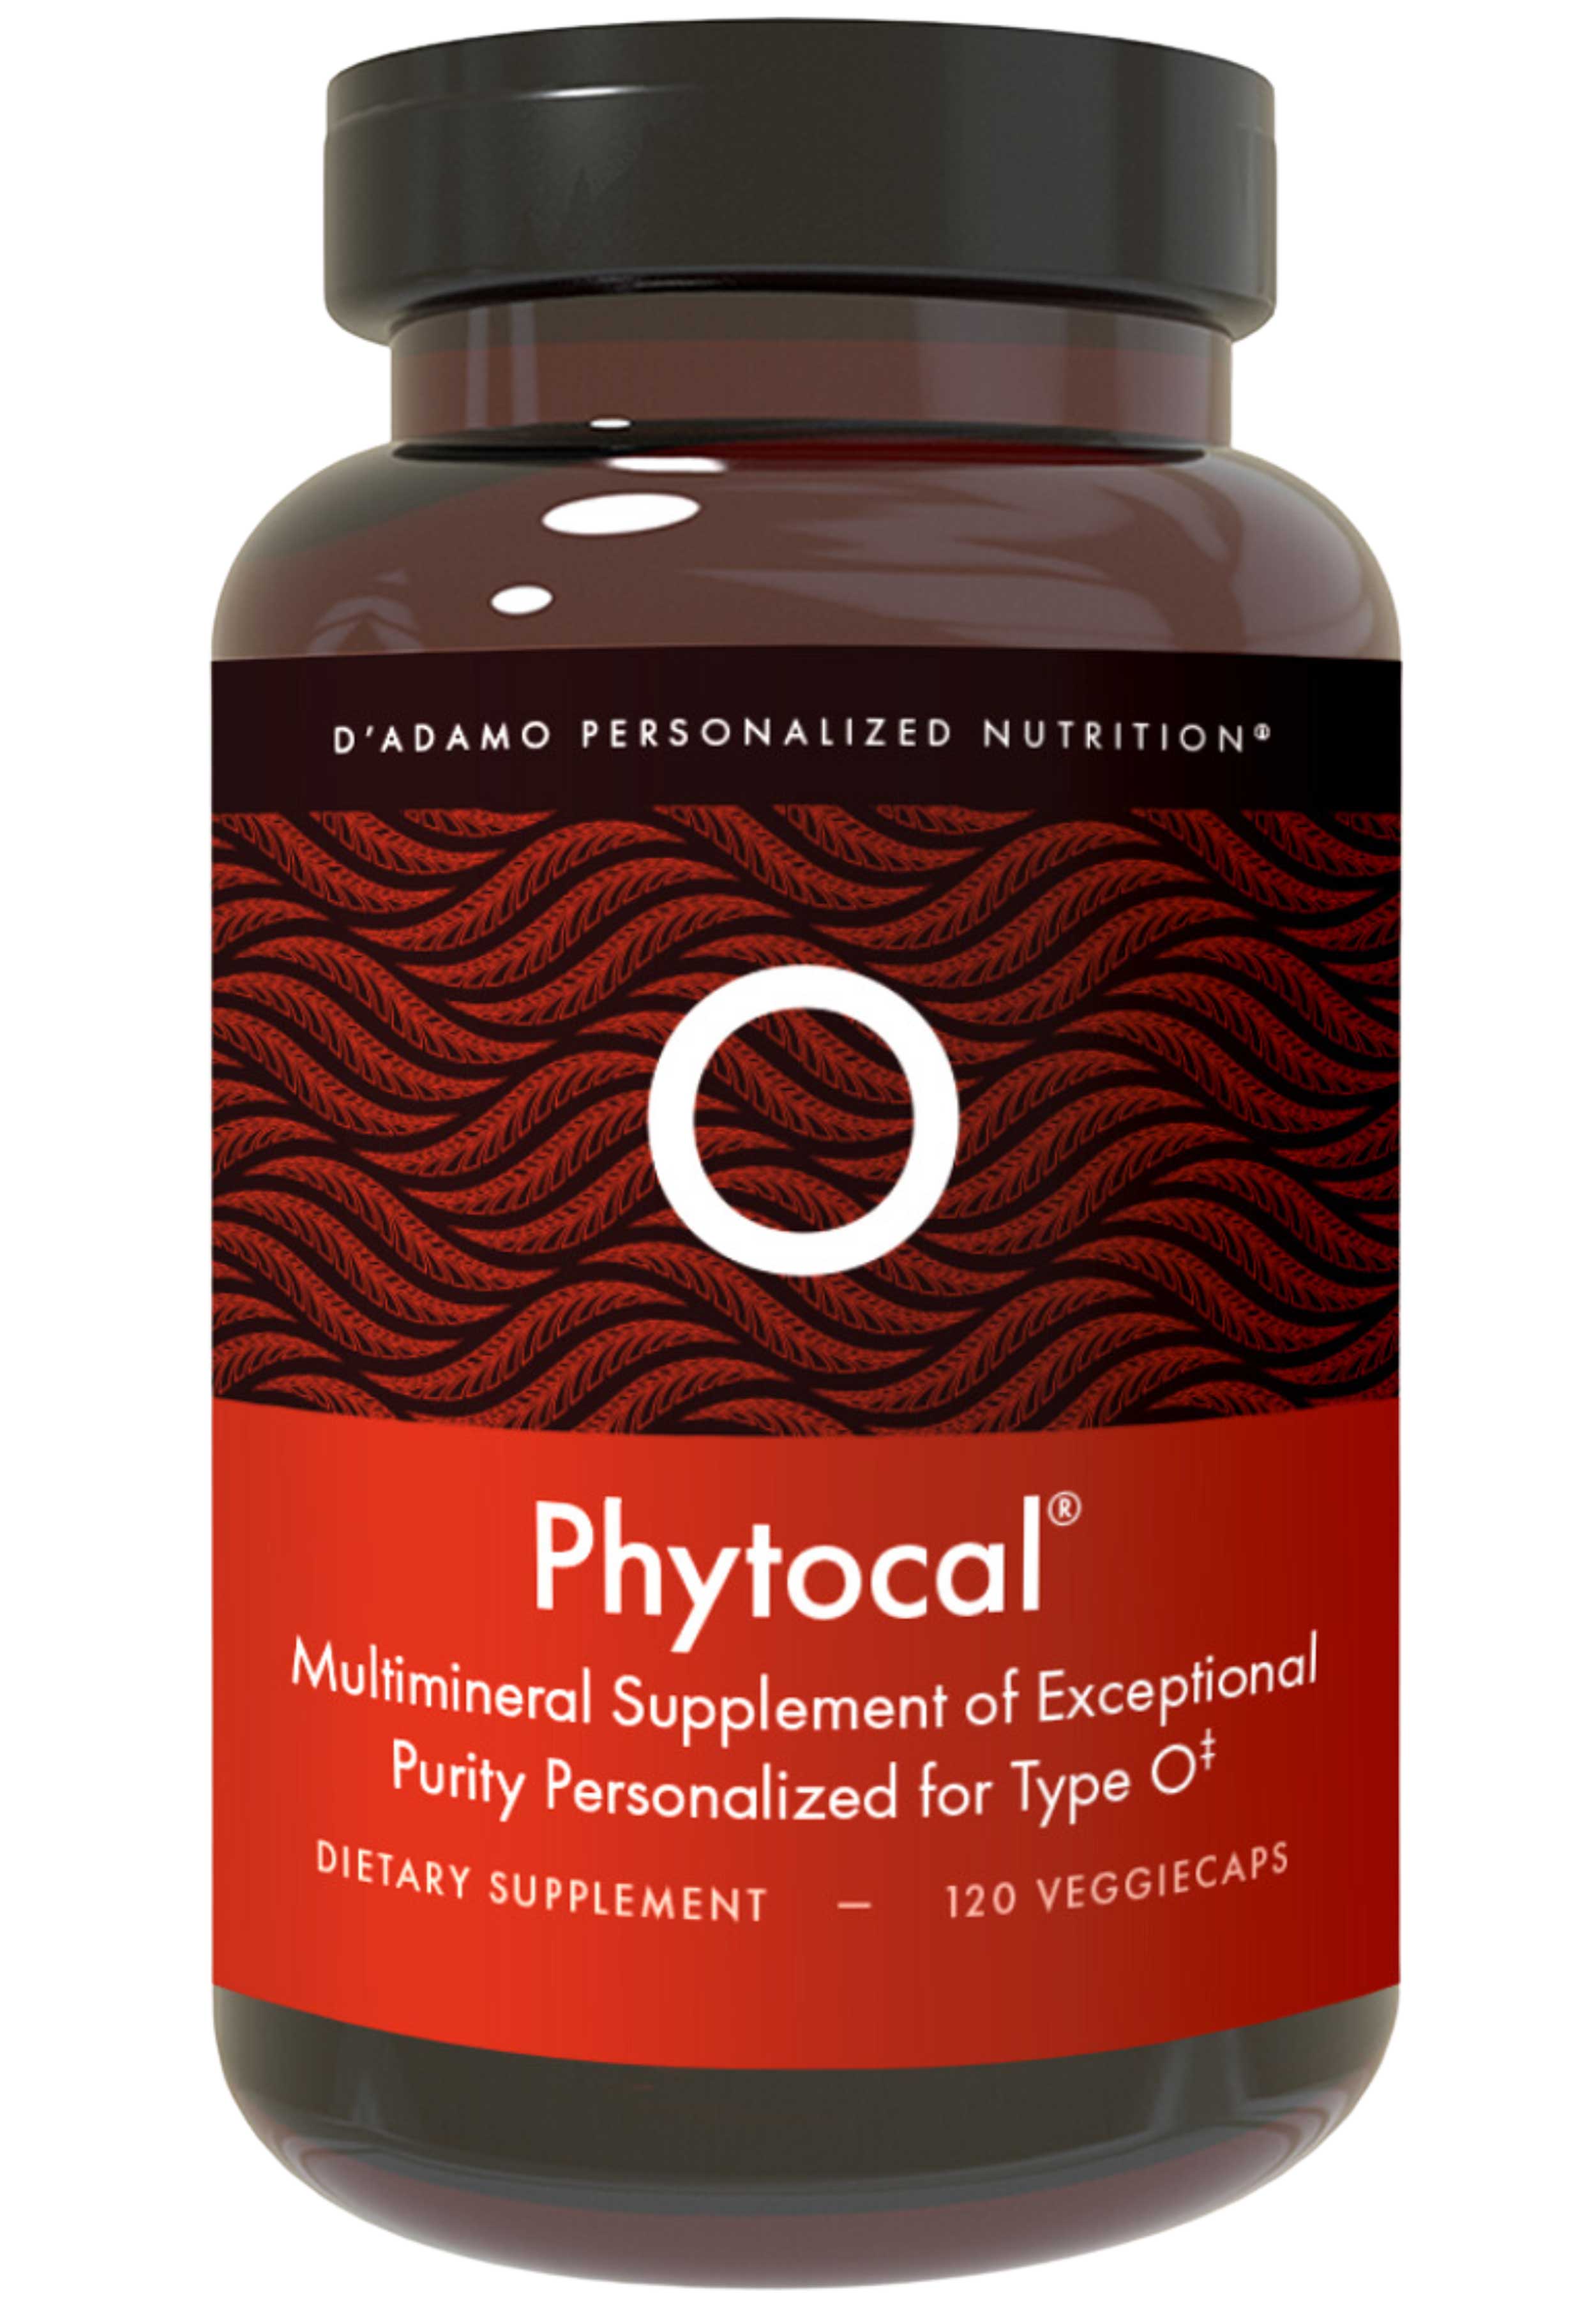 D'Adamo Personalized Nutrition Phytocal O